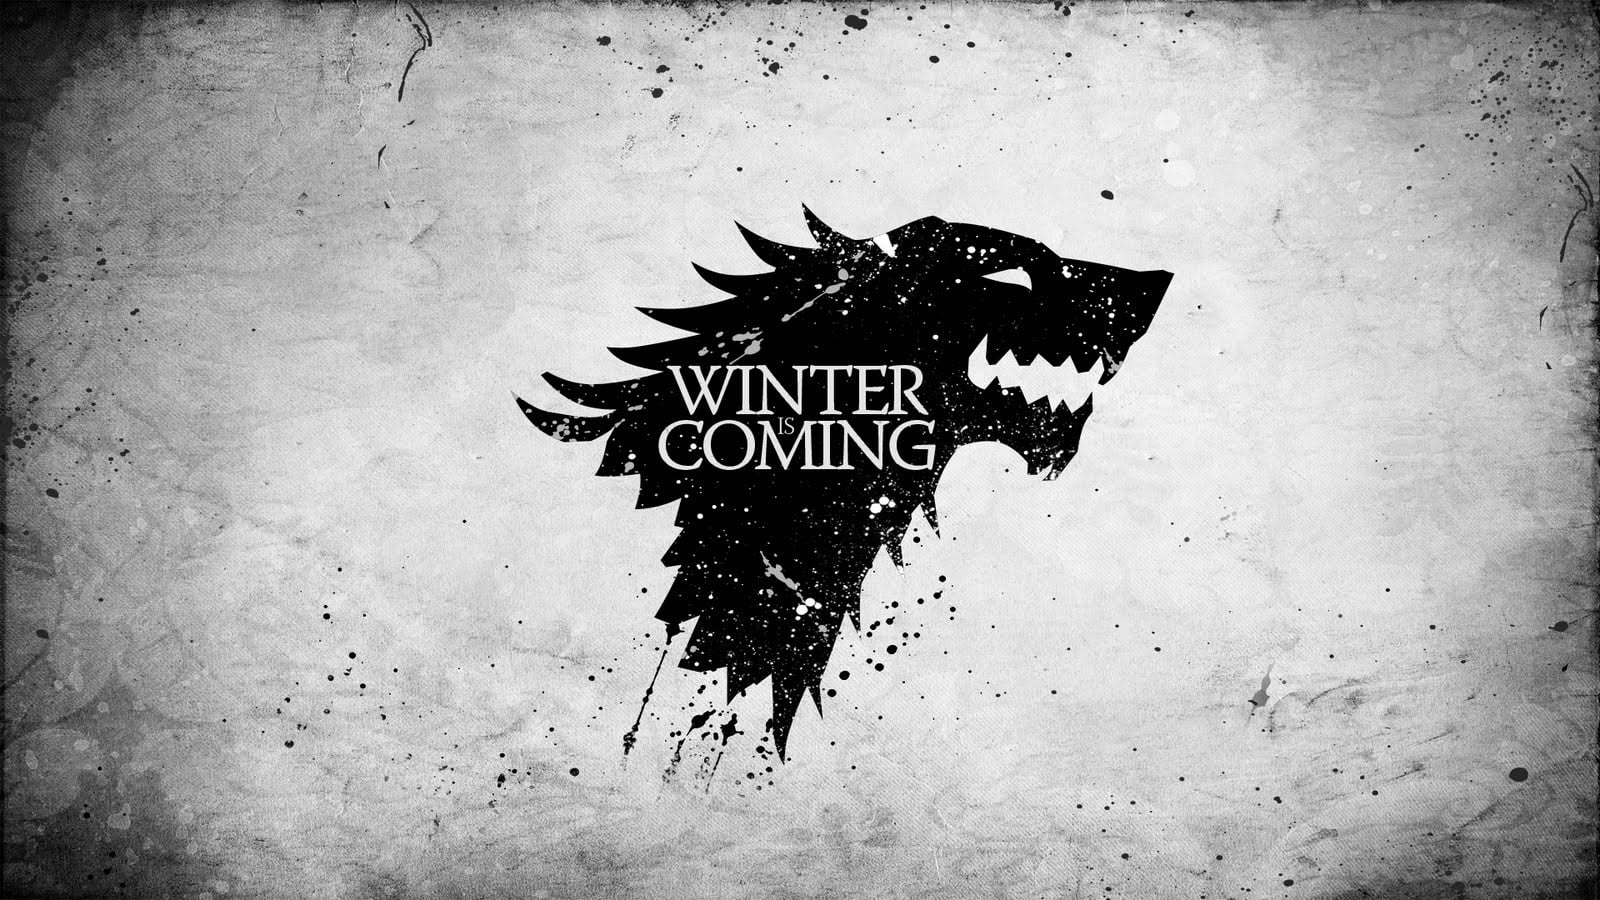 Winter Is Coming illustration